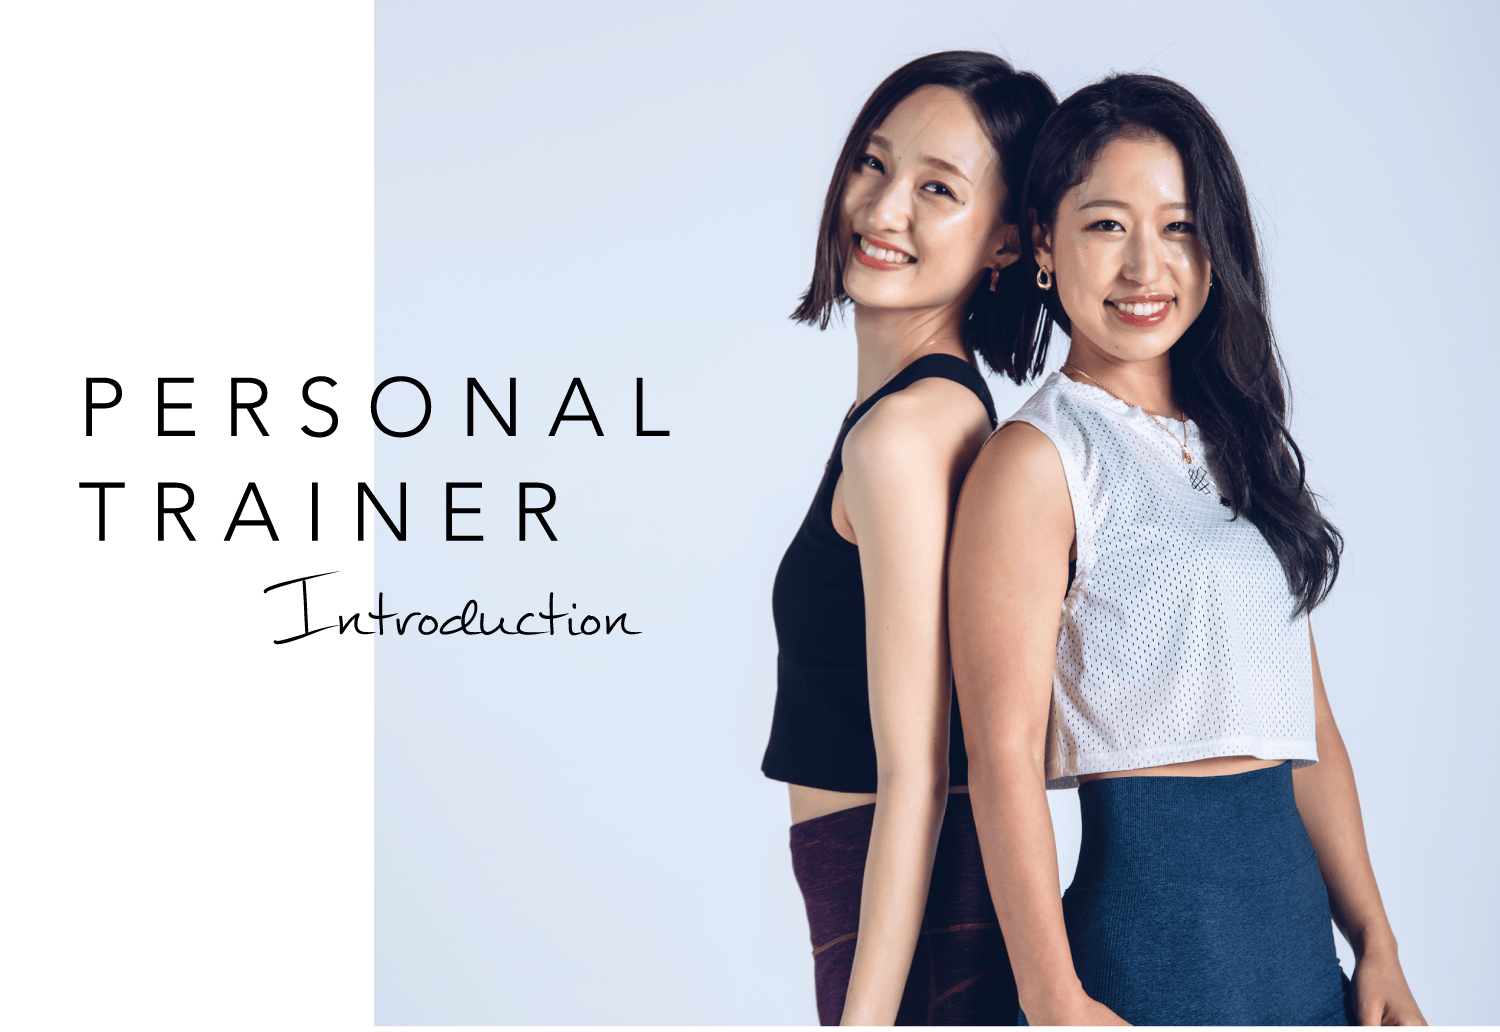 PERSONAL TRAINER Introduction